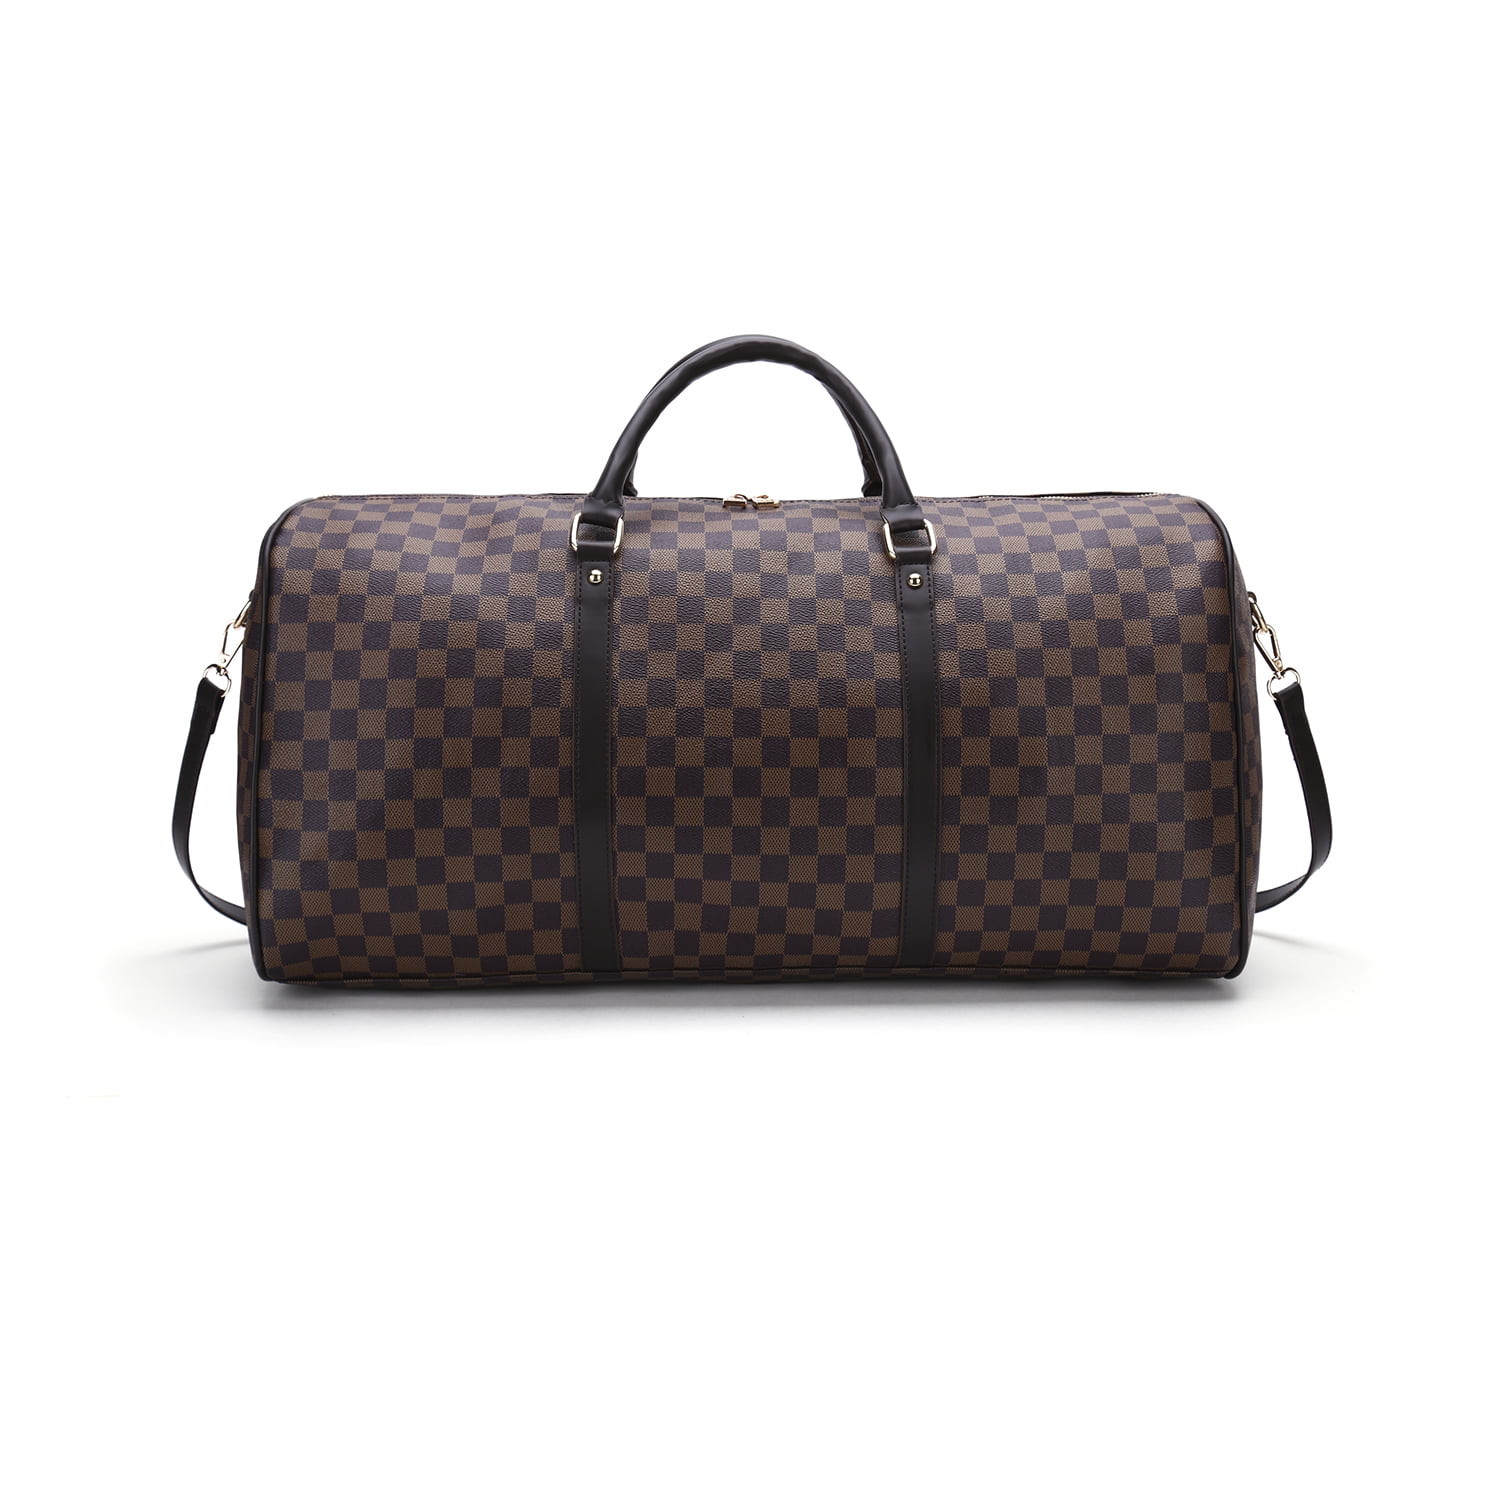 TWENTY FOUR 21Travel Duffel Bag Checkered Bag Weekend Overnight Luggage  Shoulder Bag For Men Women -Brown Checkered Mothers Day Gifts 